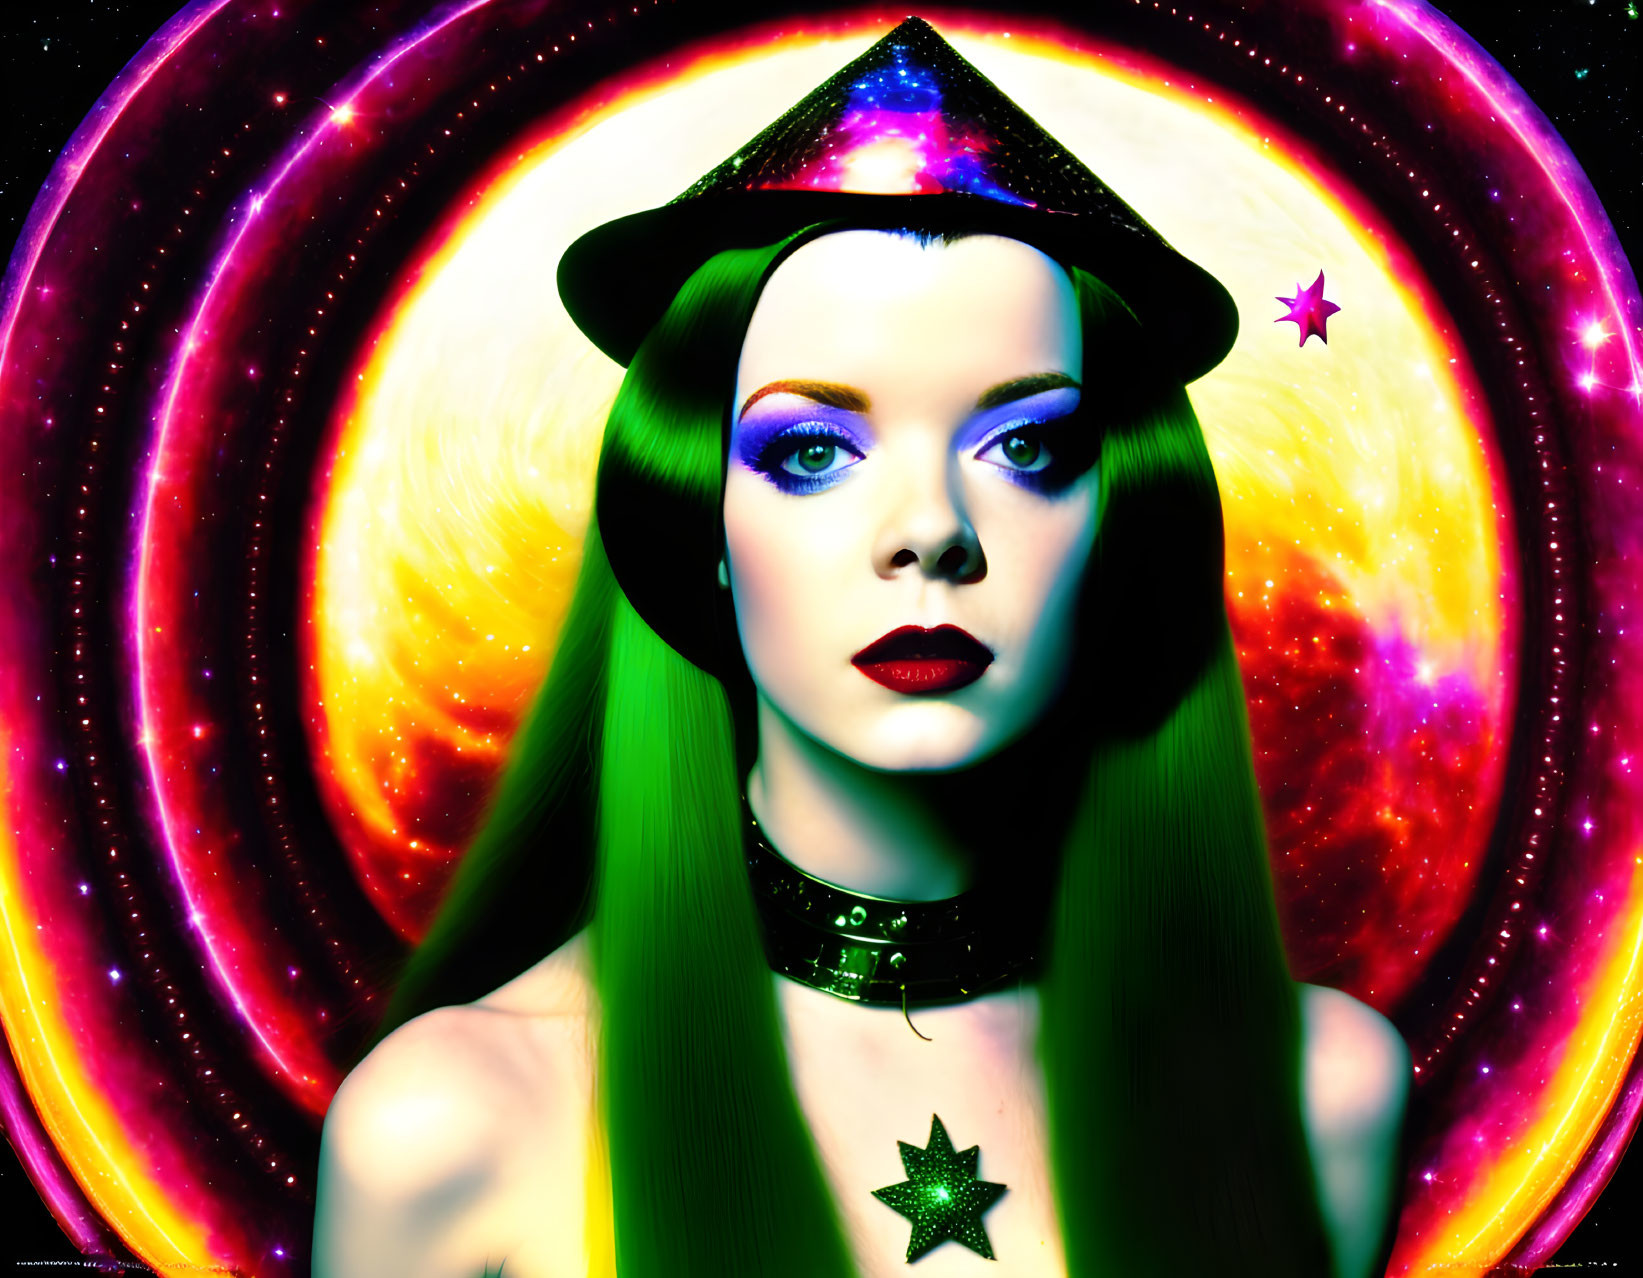 Colorful Portrait of Woman with Green Hair and Witch Hat on Cosmic Background